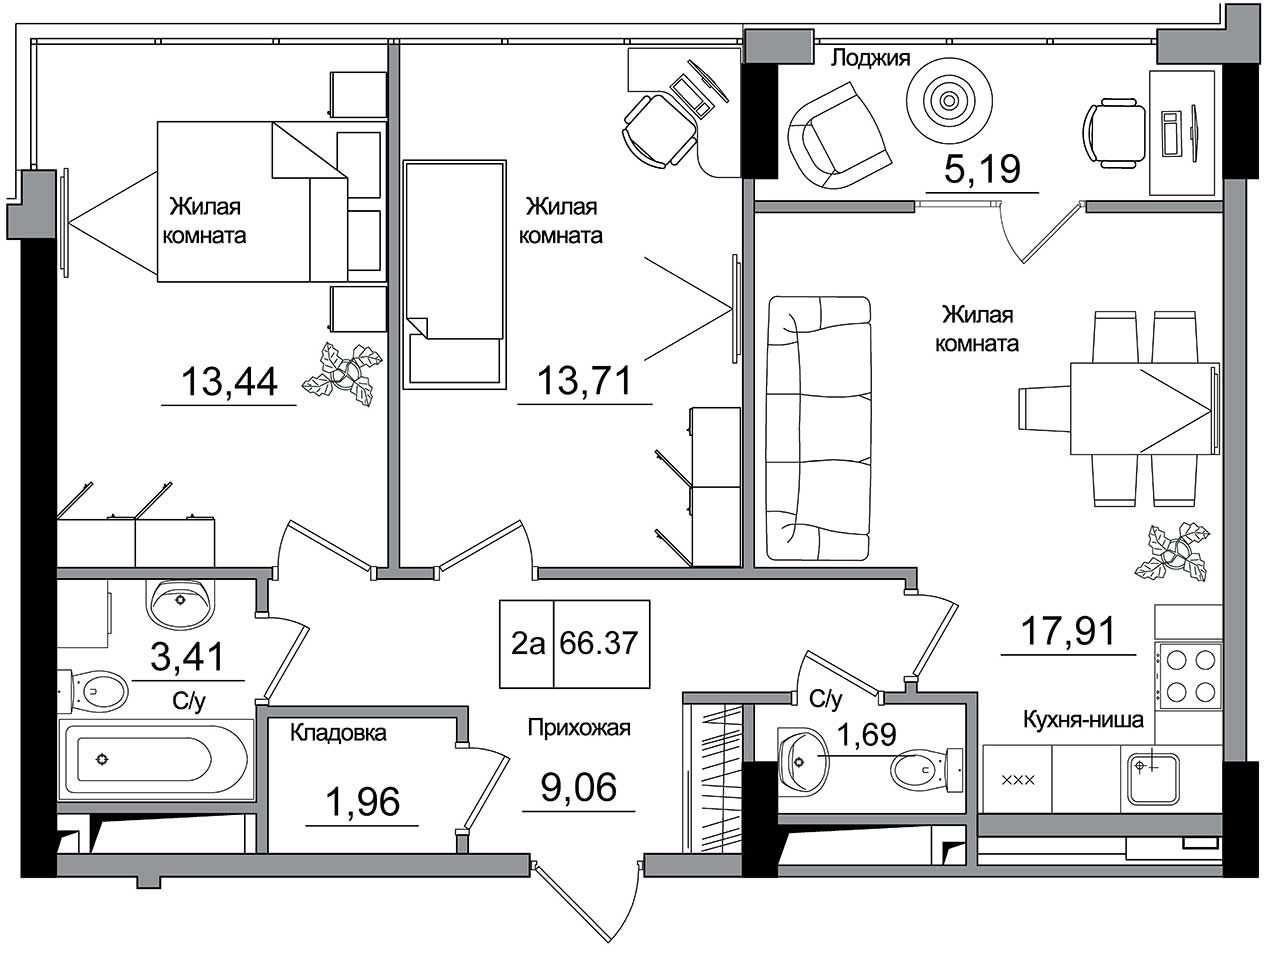 Planning 2-rm flats area 66.37m2, AB-16-02/00006.